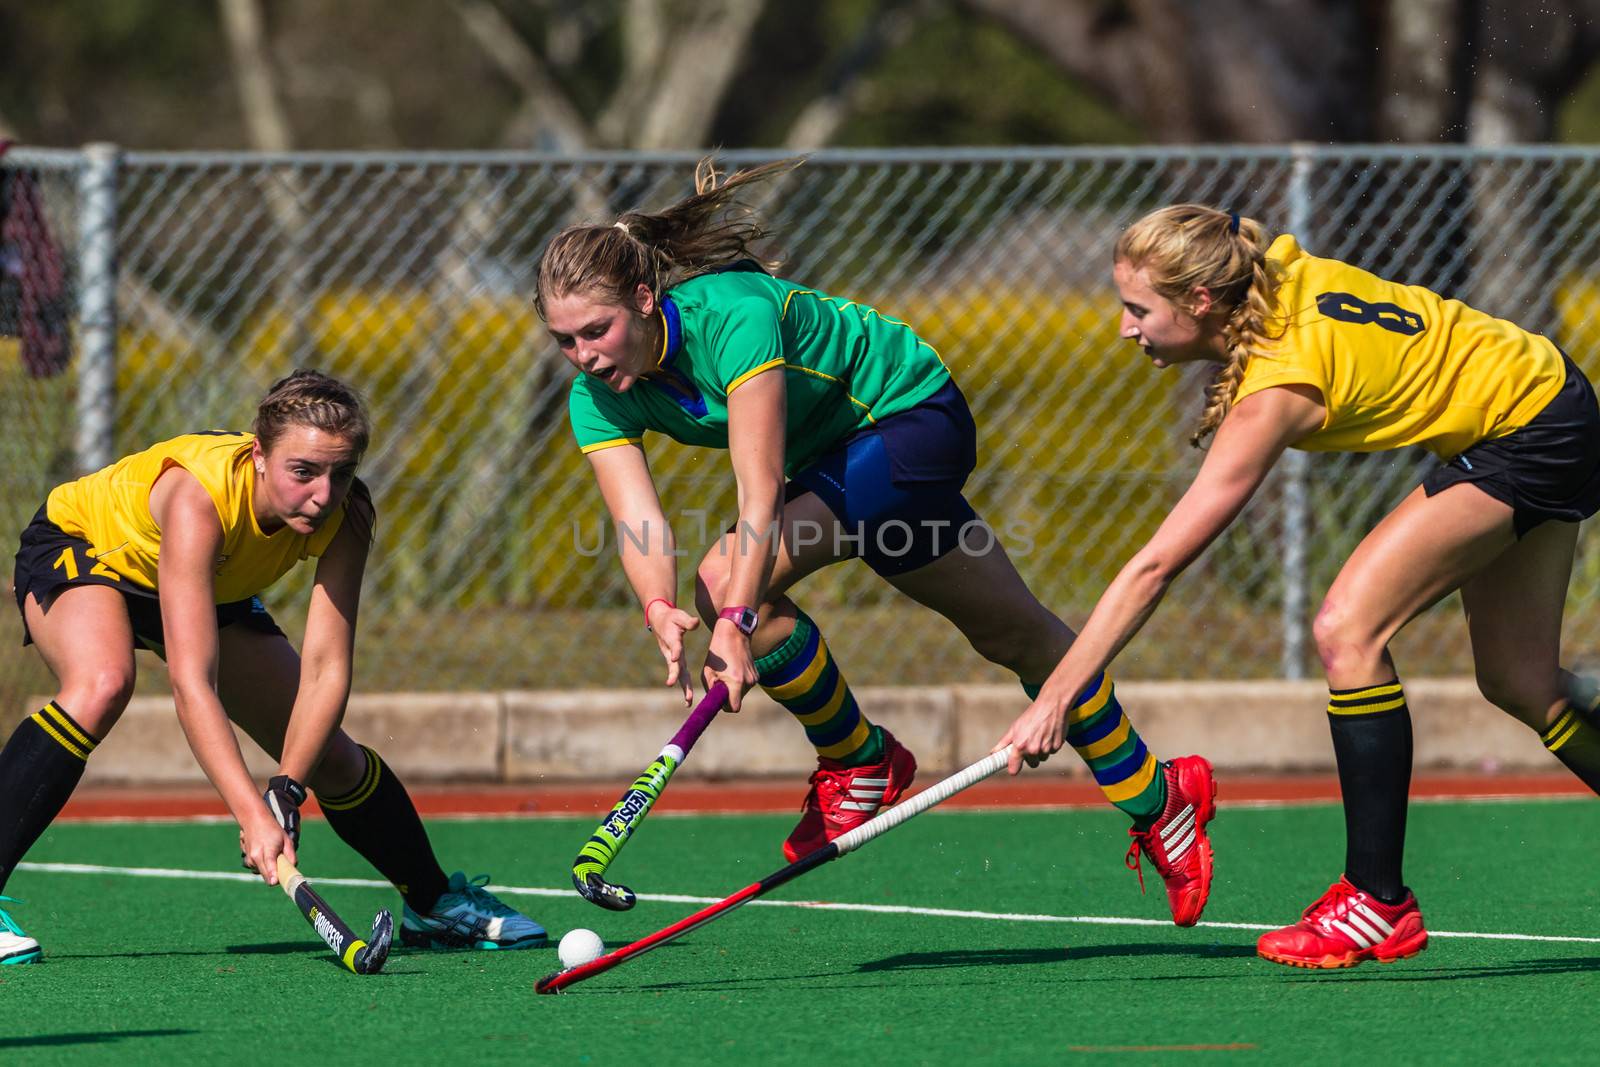 Girl hockey action on astro field at the National high school championships at Kearsney College outside Durban South-Africa